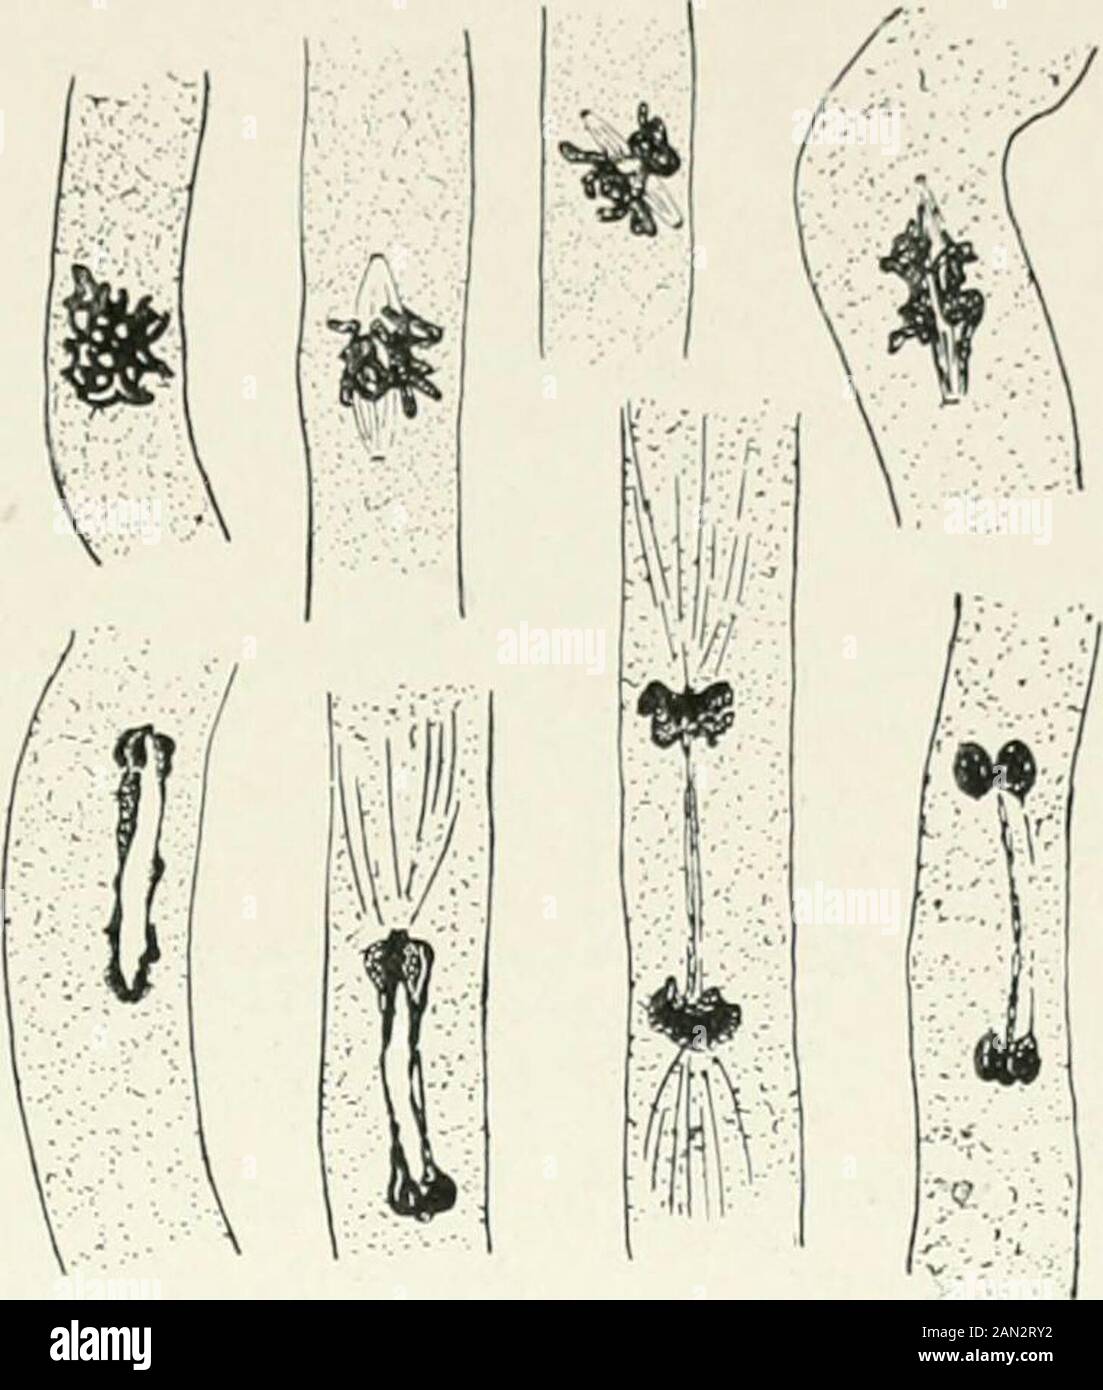 Fungi, Ascomycetes, Ustilaginales, Uredinales . ation. Thecytology of the aecidium wasfirst described in detail in 1904In Blackman, for Phragmidiumvio/aceum, a species occurring onthe bramble. The aecidium here is of the caeoma type, consisting of a groupof fertile cells of indefinite extent and usually bounded at the periphery bya number of thin-walled paraphyses. Its formation begins by the massing of hyphae below the epidermis of the leaf where they form a series of uninucleate cells two or three layers thick. The cells next the epidermis increase in size and each divides by a transverse wa Stock Photo